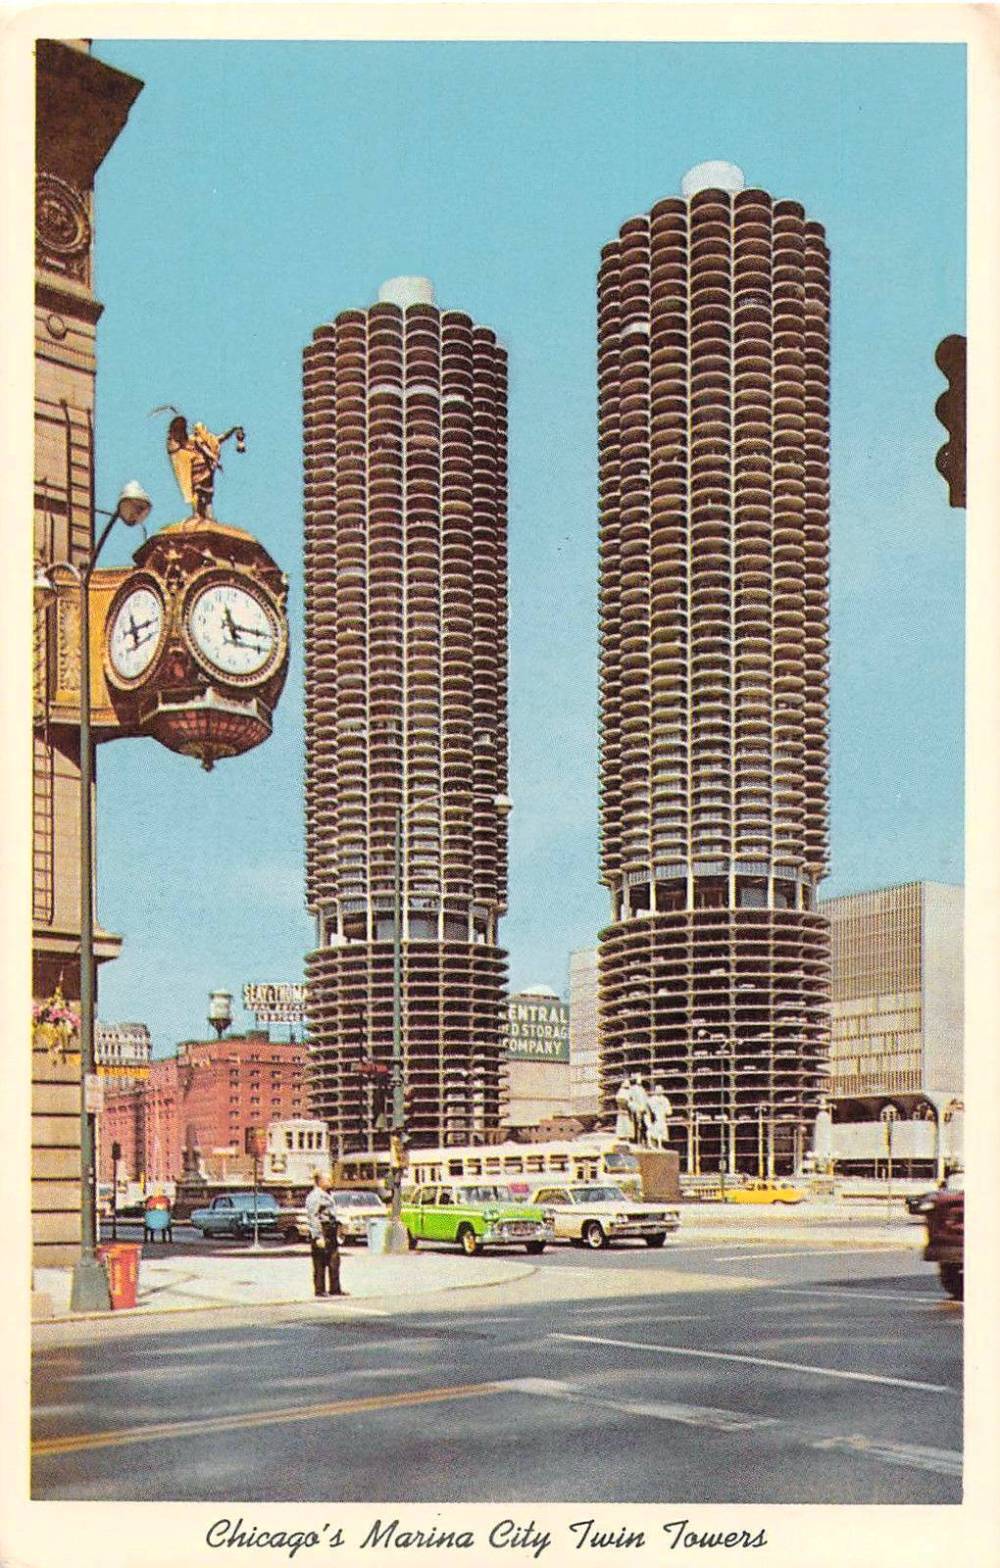 POSTCARD - CHICAGO - WABASH AND WACKER - LOOKING NW - MARINA CITY - FATHER TIME CLOCK FROM ORIGINAL JEWELERS' BUILDING ONN LEFT - 1960s